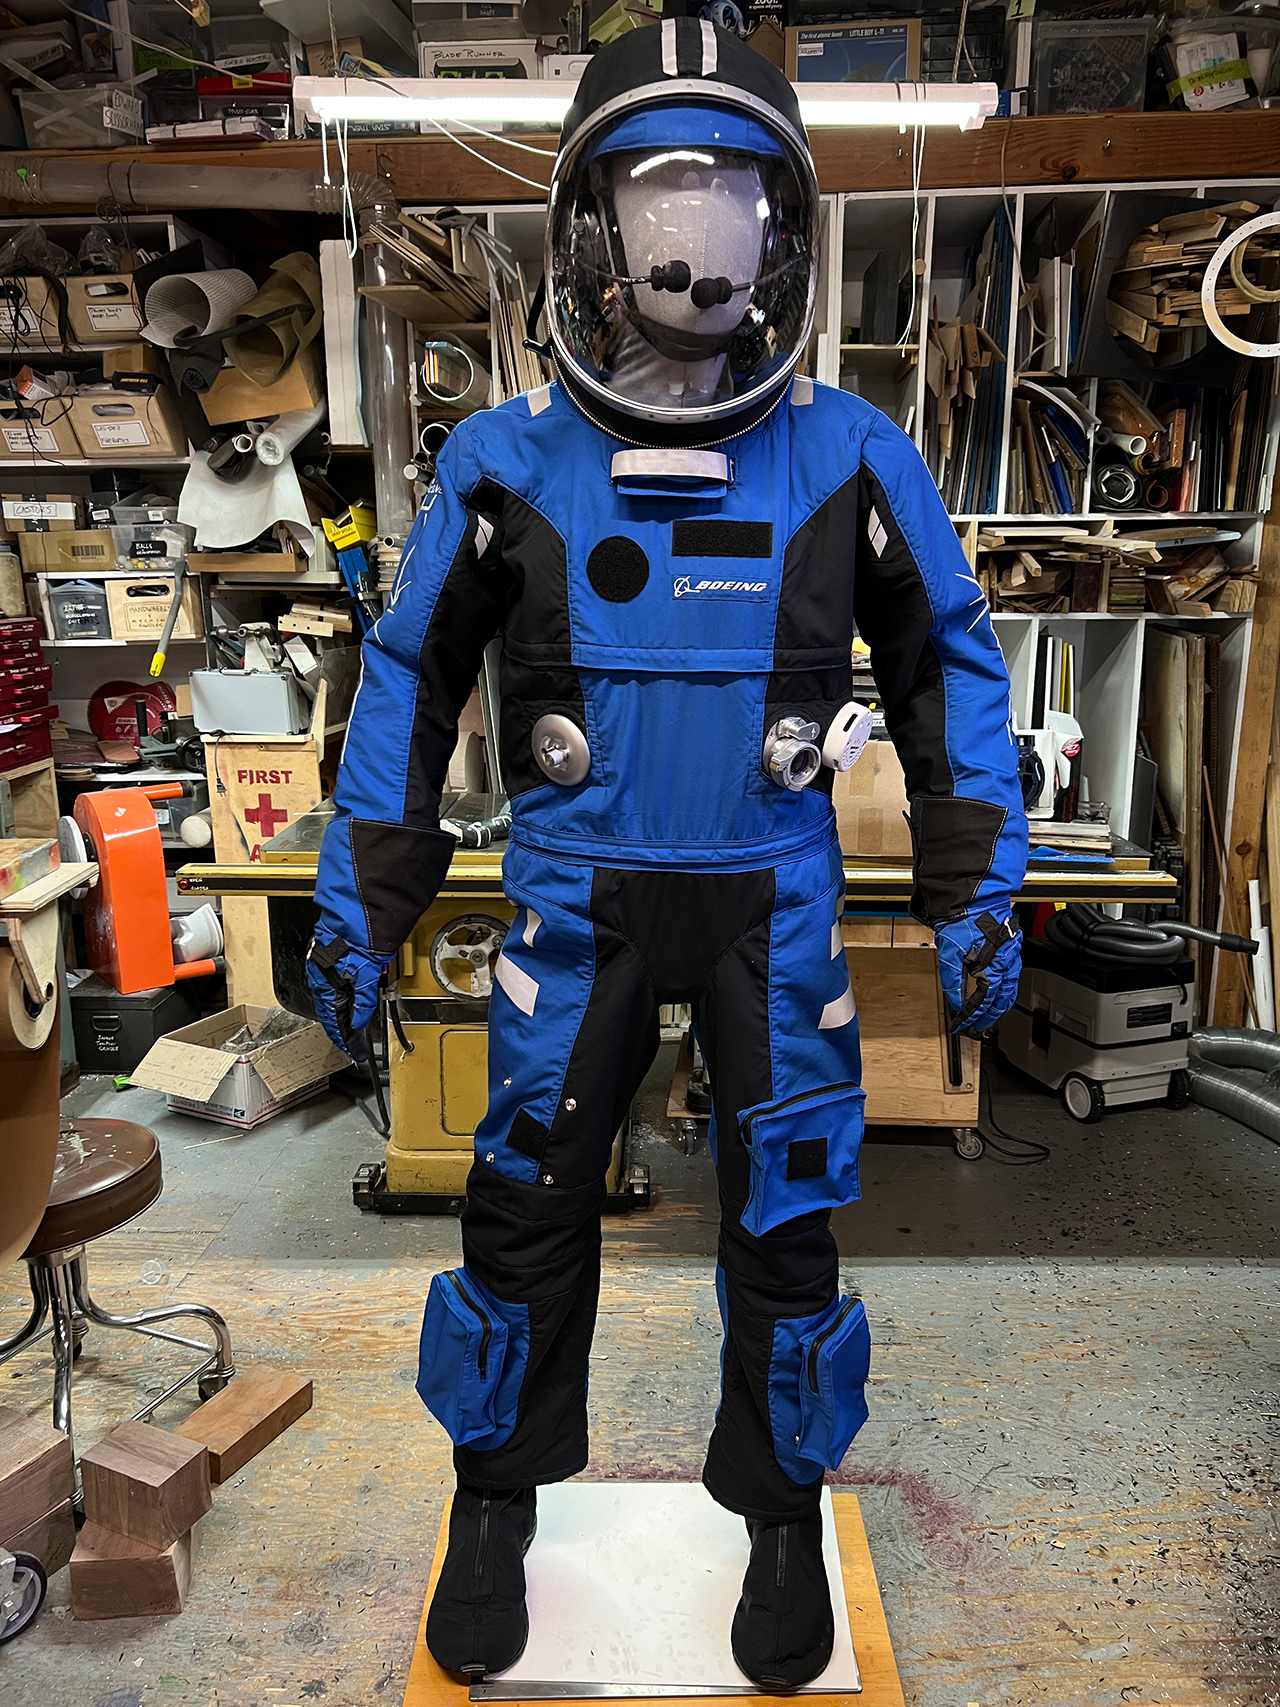 Adam Savage's replica of ILC Dover's Ascent and Entry Suit (AES) for Boeing's CST-100 Starliner crew spacecraft as seen in Savage's San Francisco workshop prior to shipping NASA's Kennedy Space Center Visitor Complex in Florida.